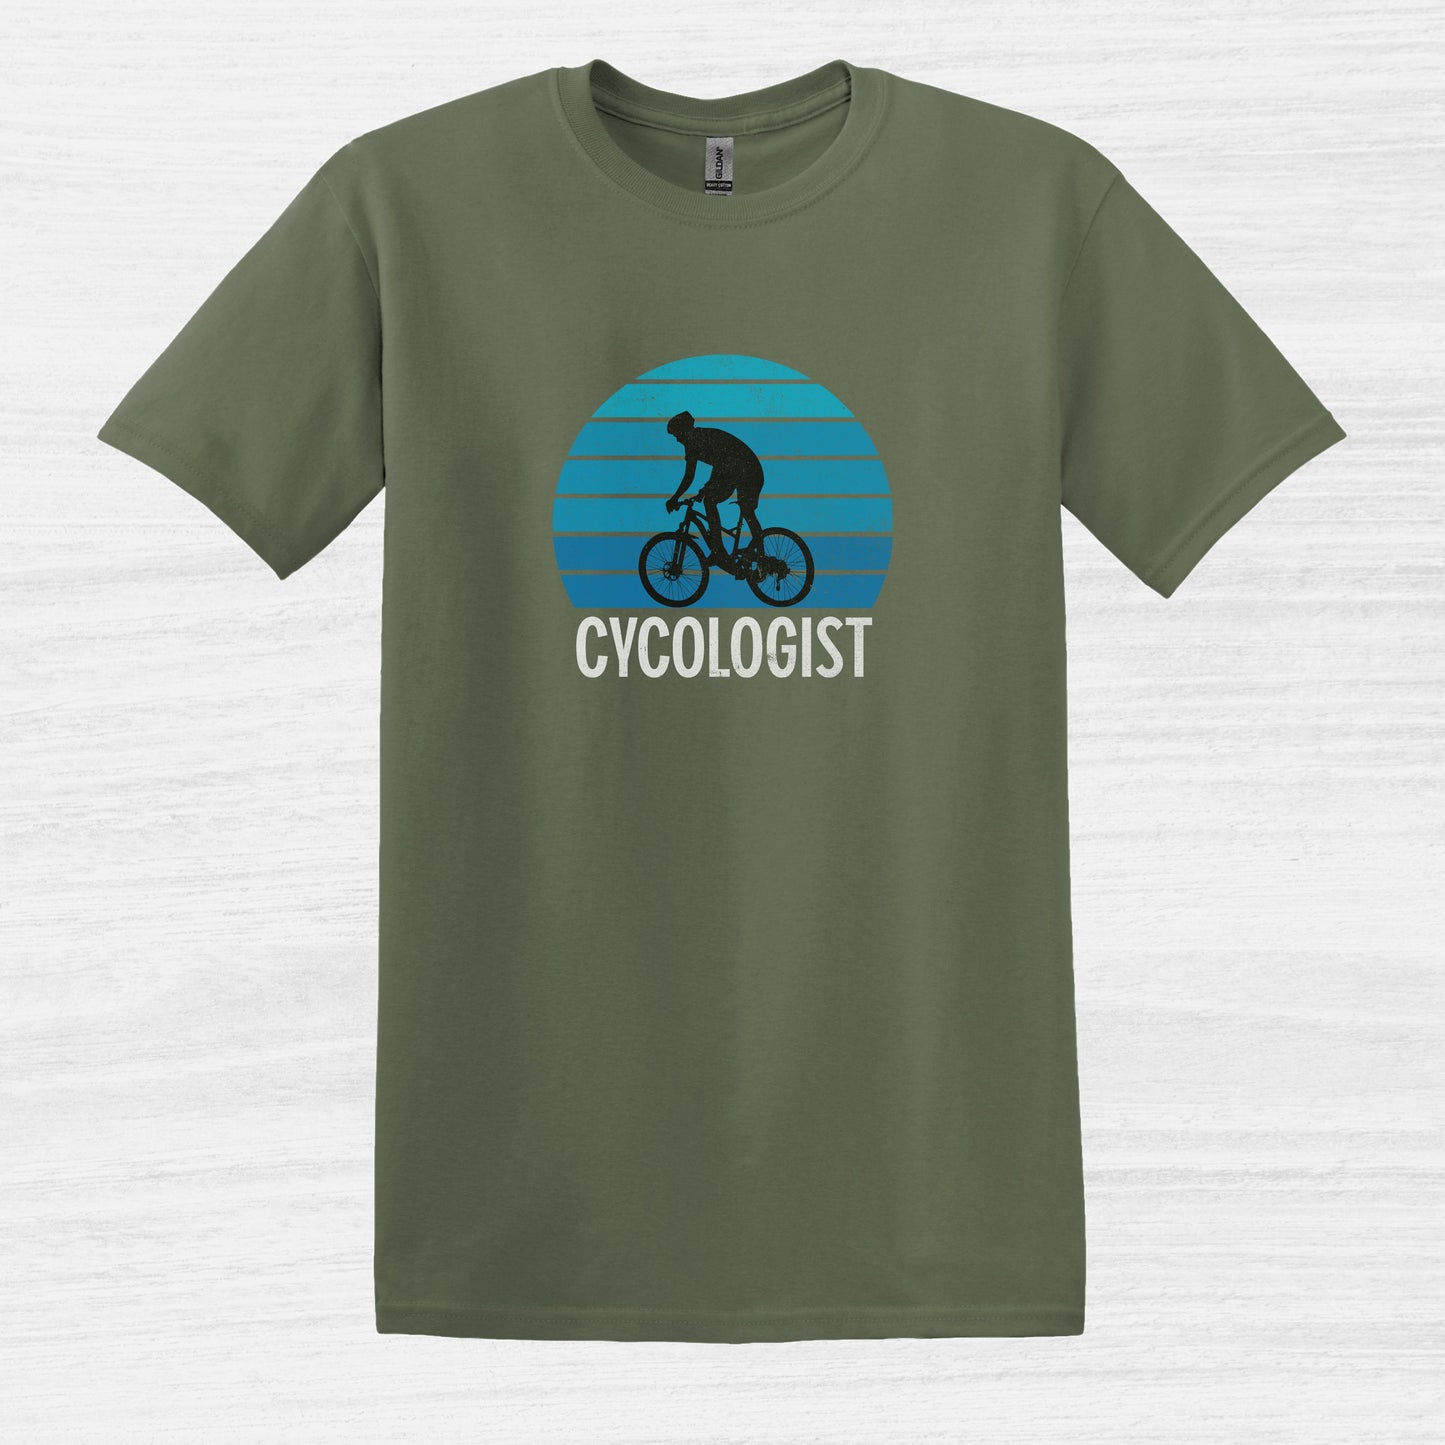 Bike Bliss Cycologist Bicycle T-Shirt for Men Vintage Style Military Green 2